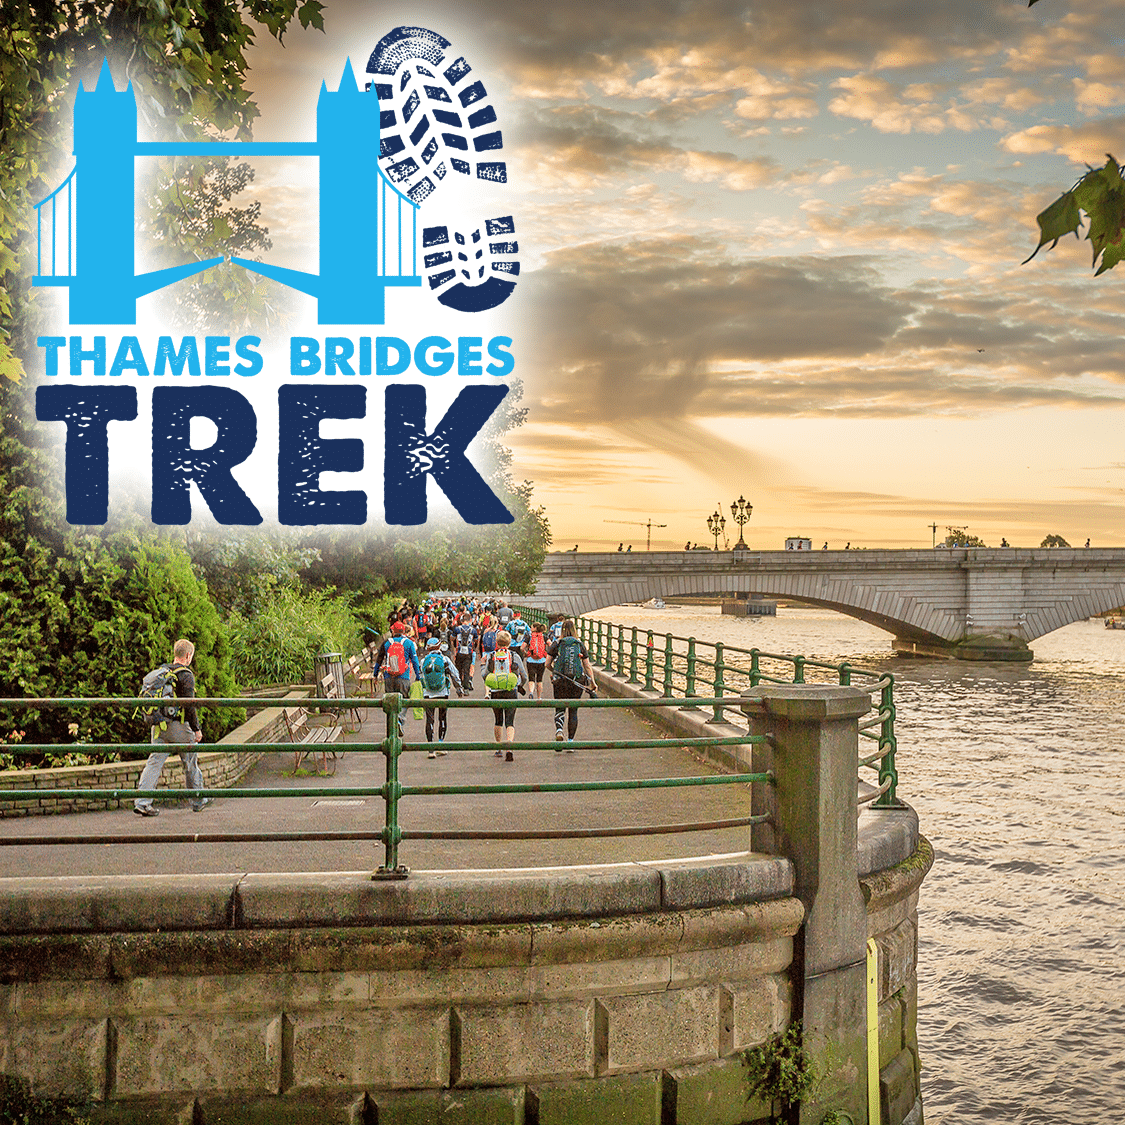 Image reads 'Thames Bridges Trek' in blue font. The image shows a crow of walkers walking along a path next to the Thames heading towards a bridge